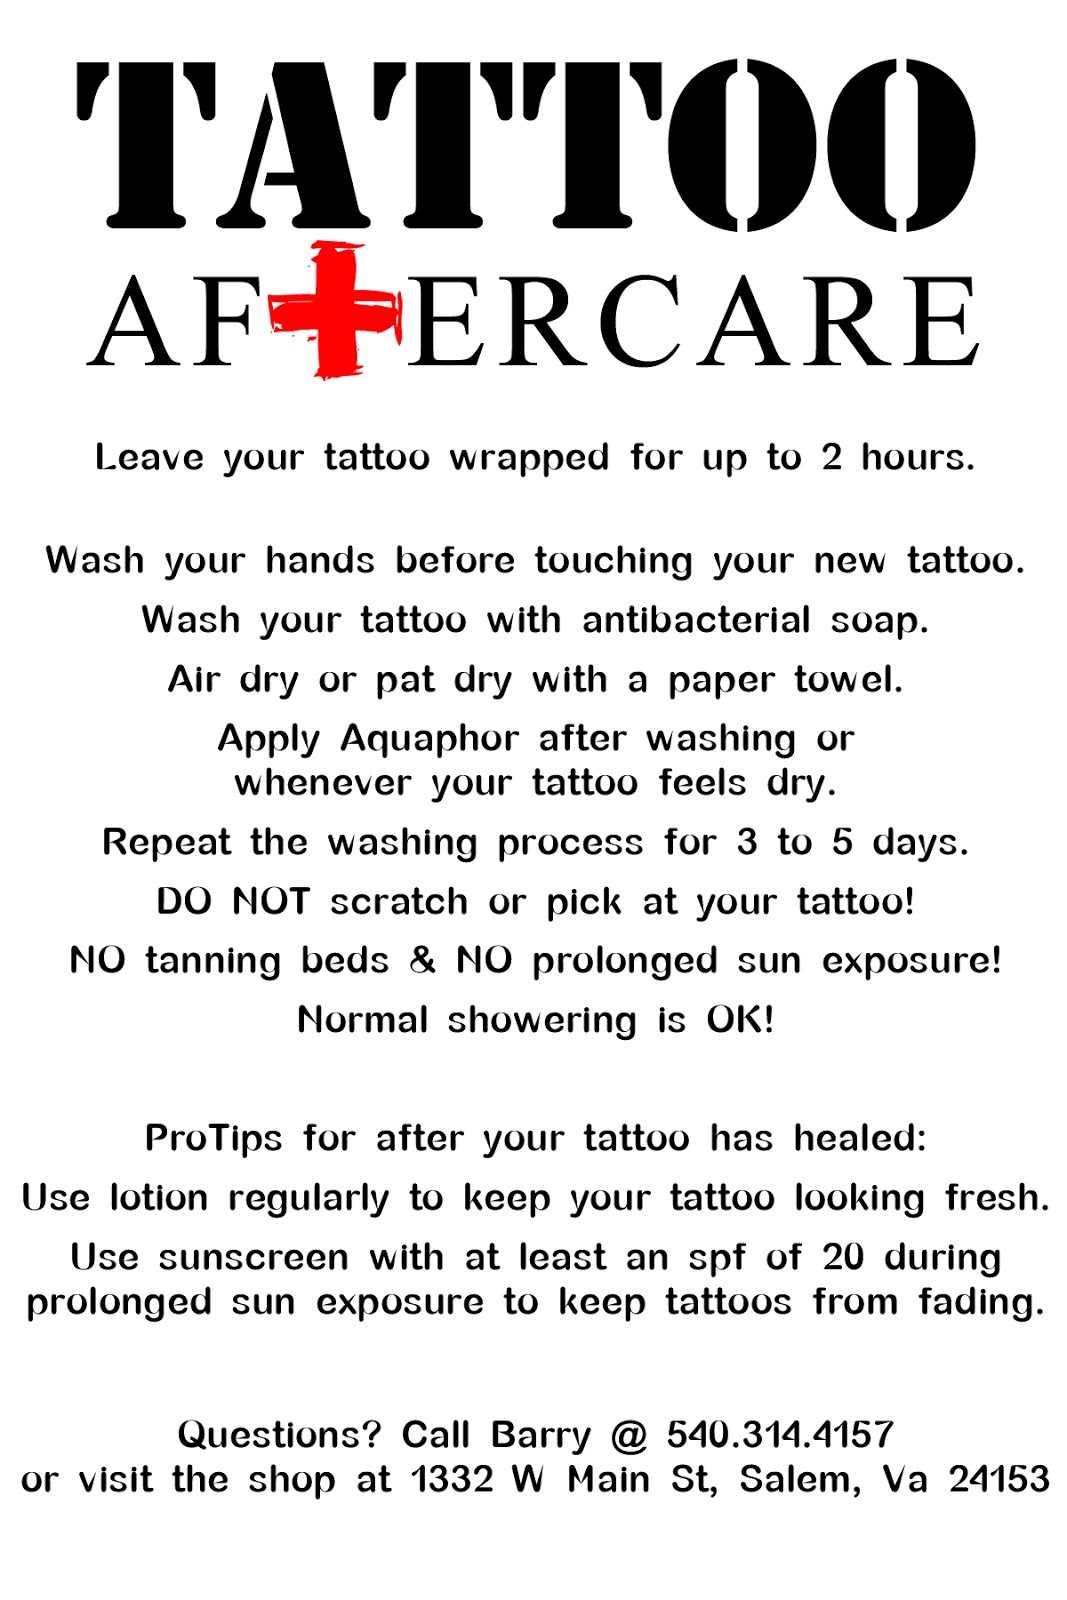 Home Medical Aftercare Pictures to Pin on Pinterest 